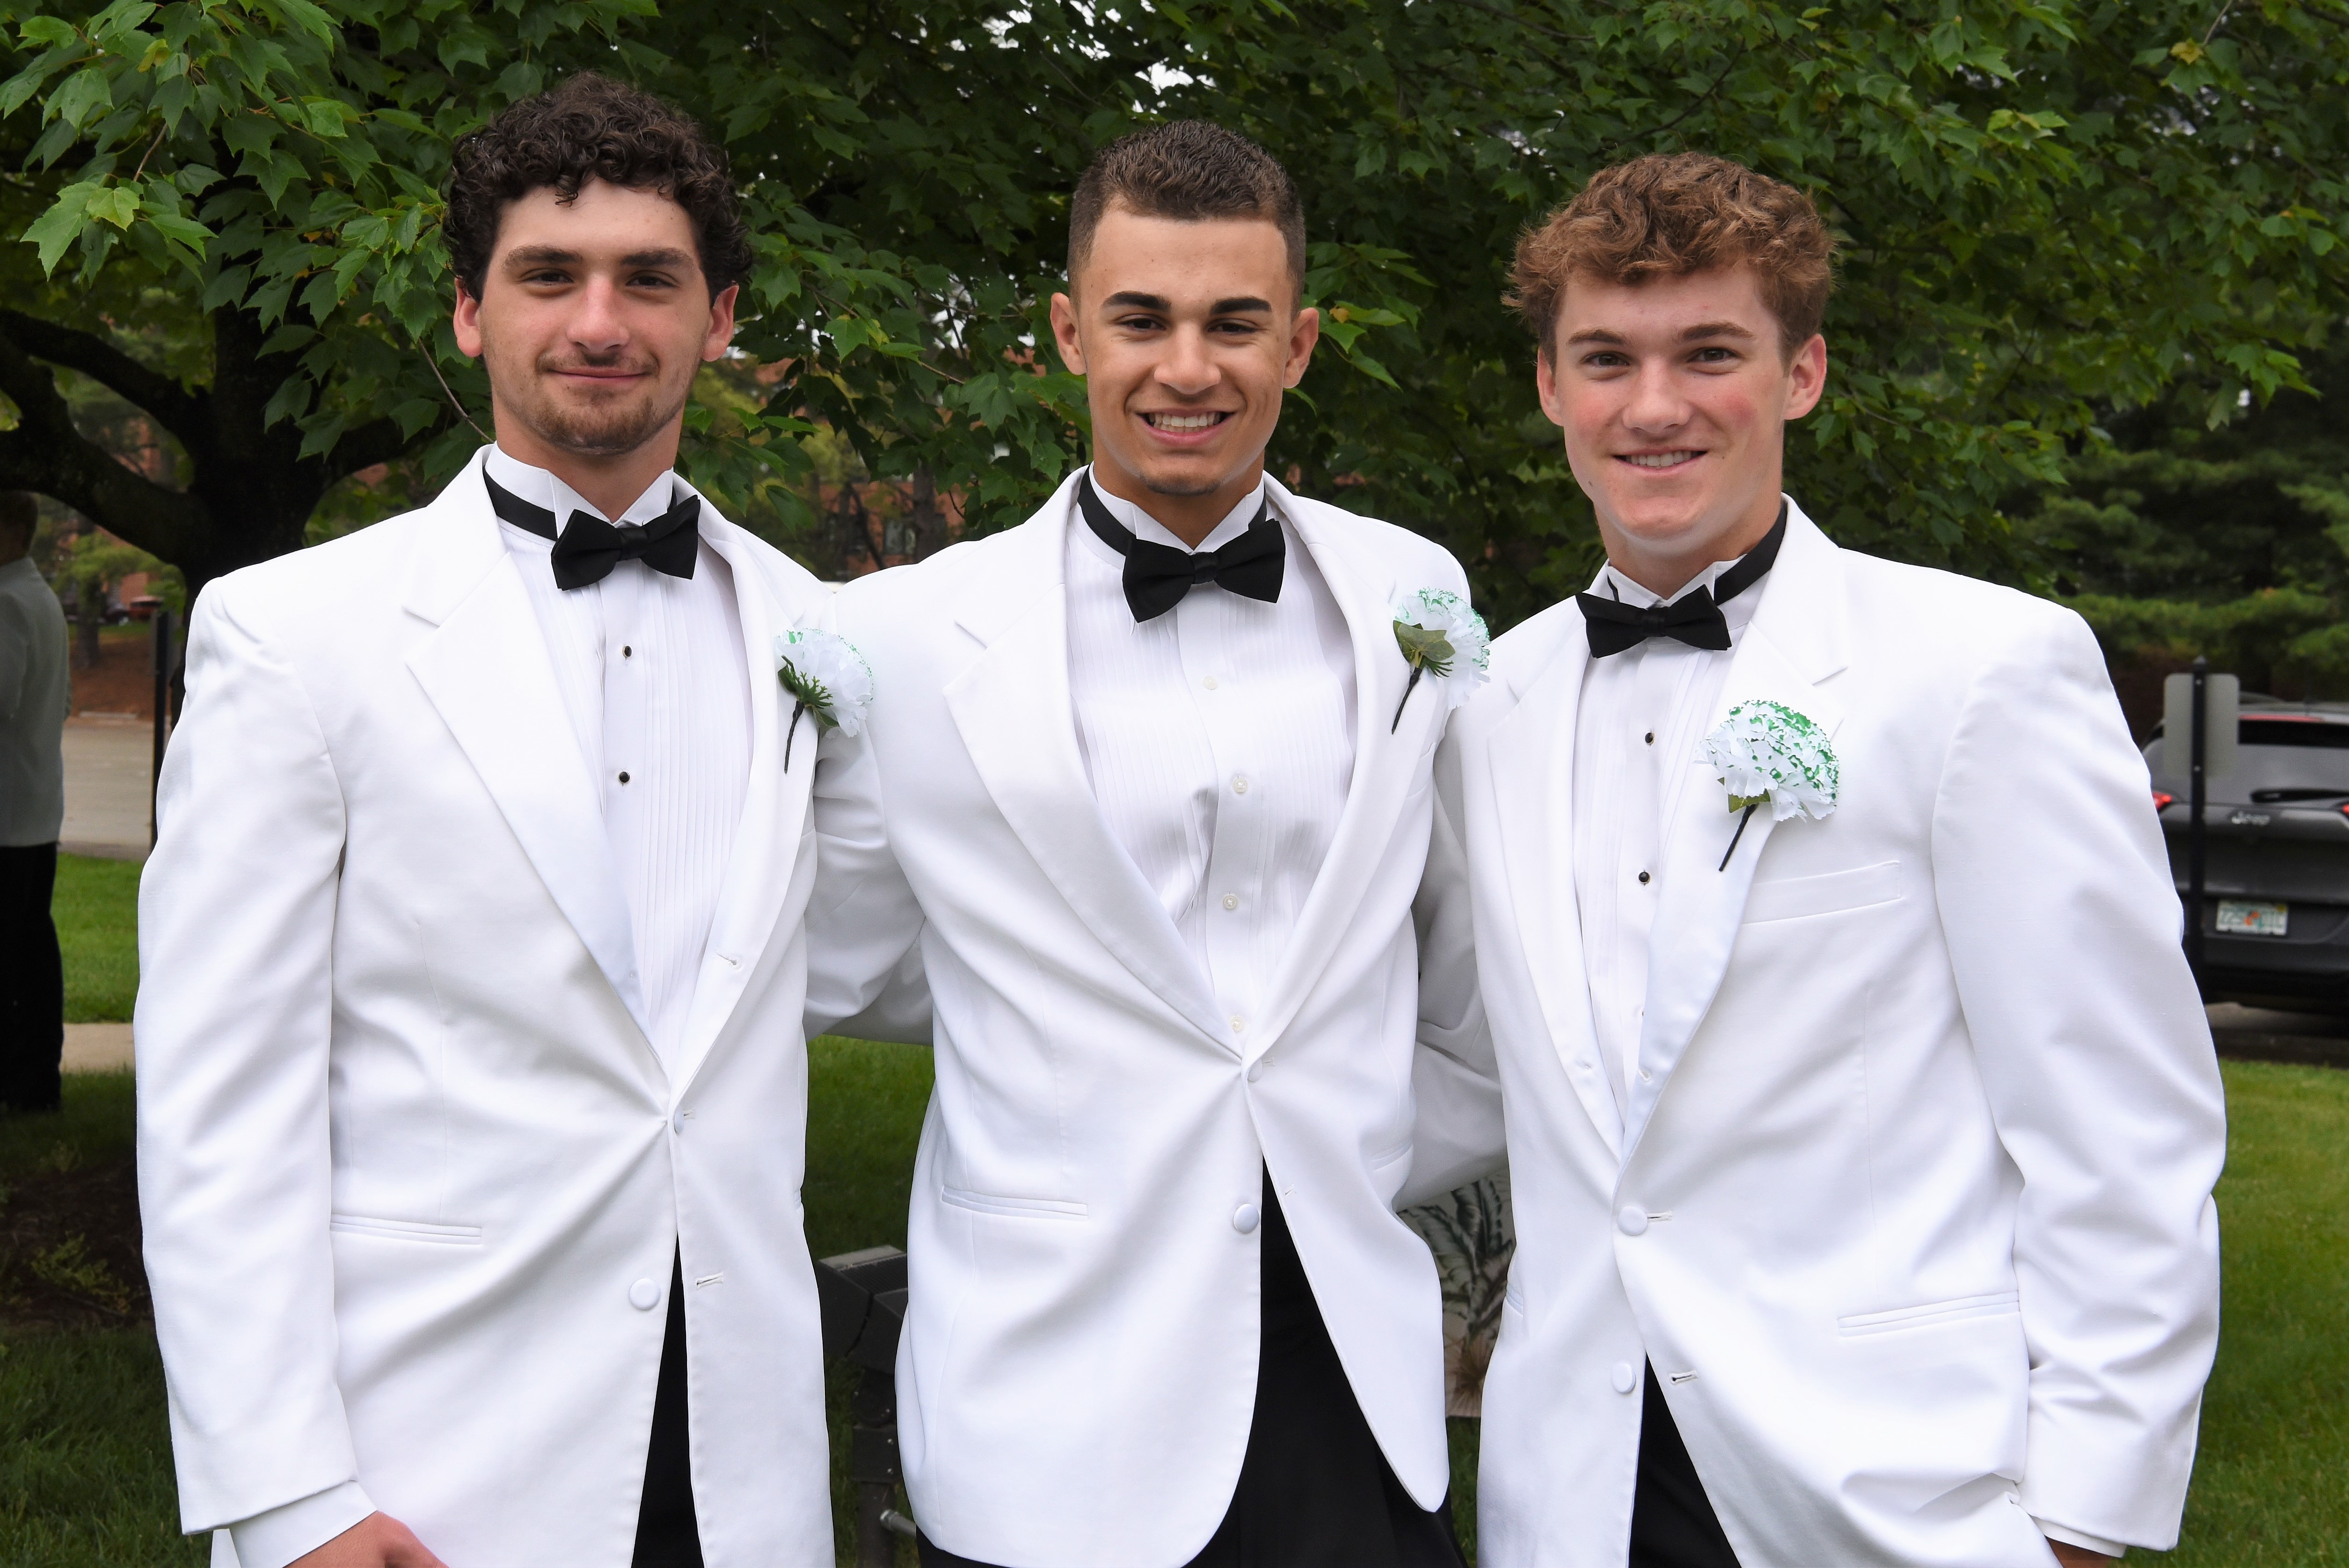 3 students standing with white suits on